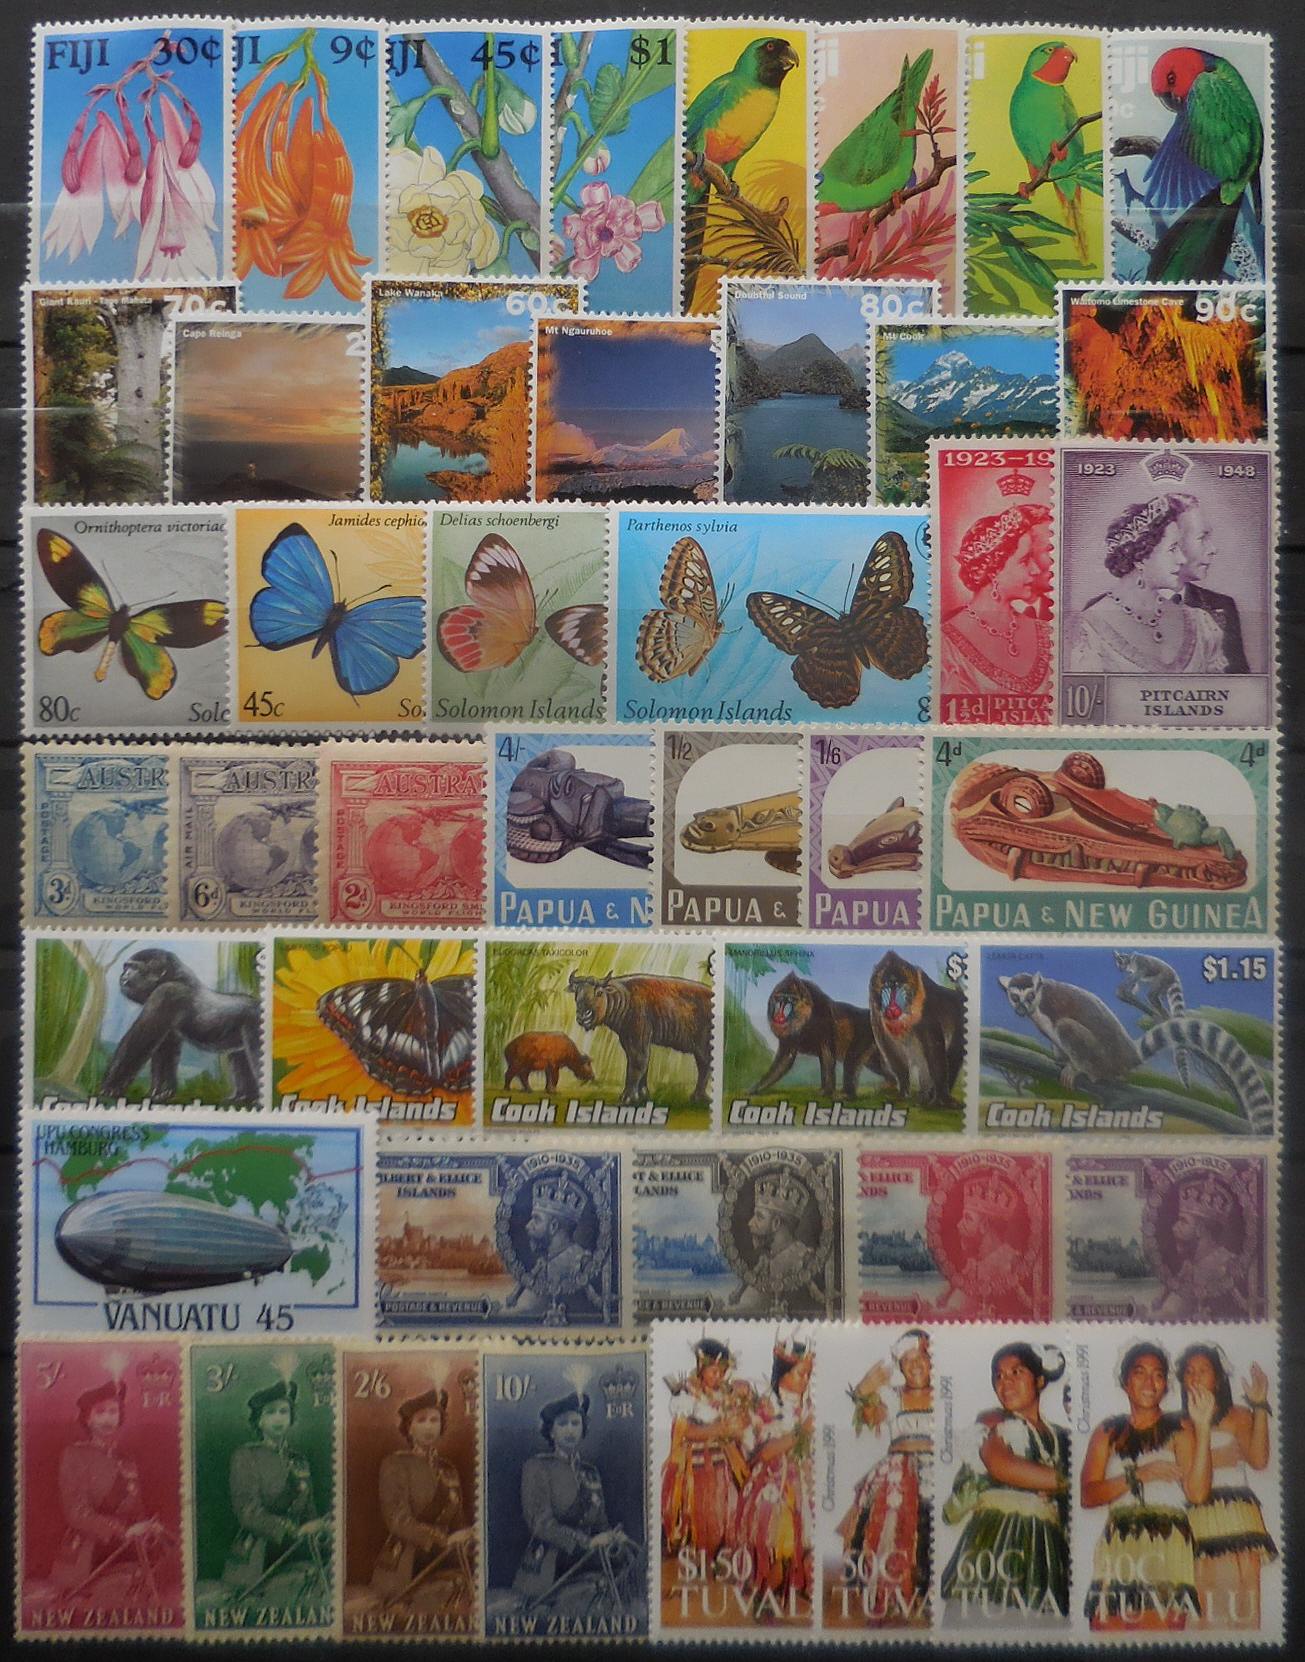 British pacific stamps for collectors on approval